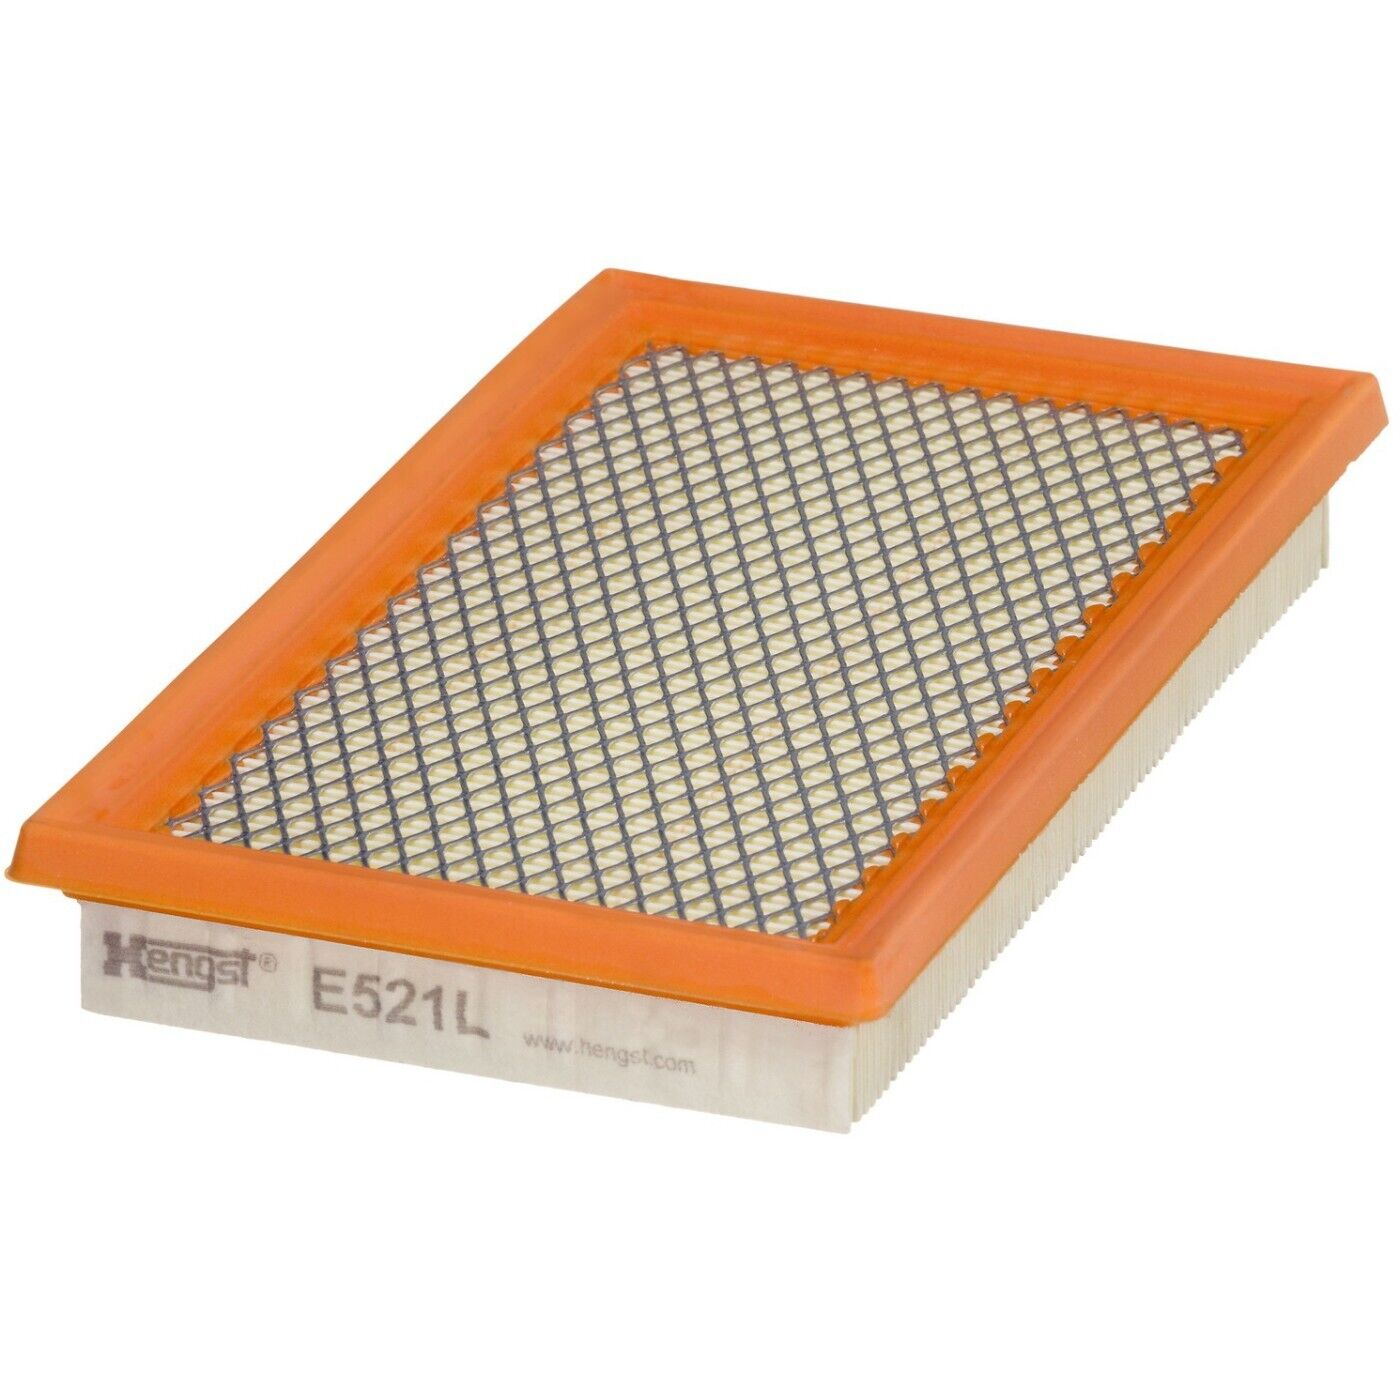 Hengst E521L Air Filters for Chevy Nissan NV200 Chevrolet City Express Q50 Cube